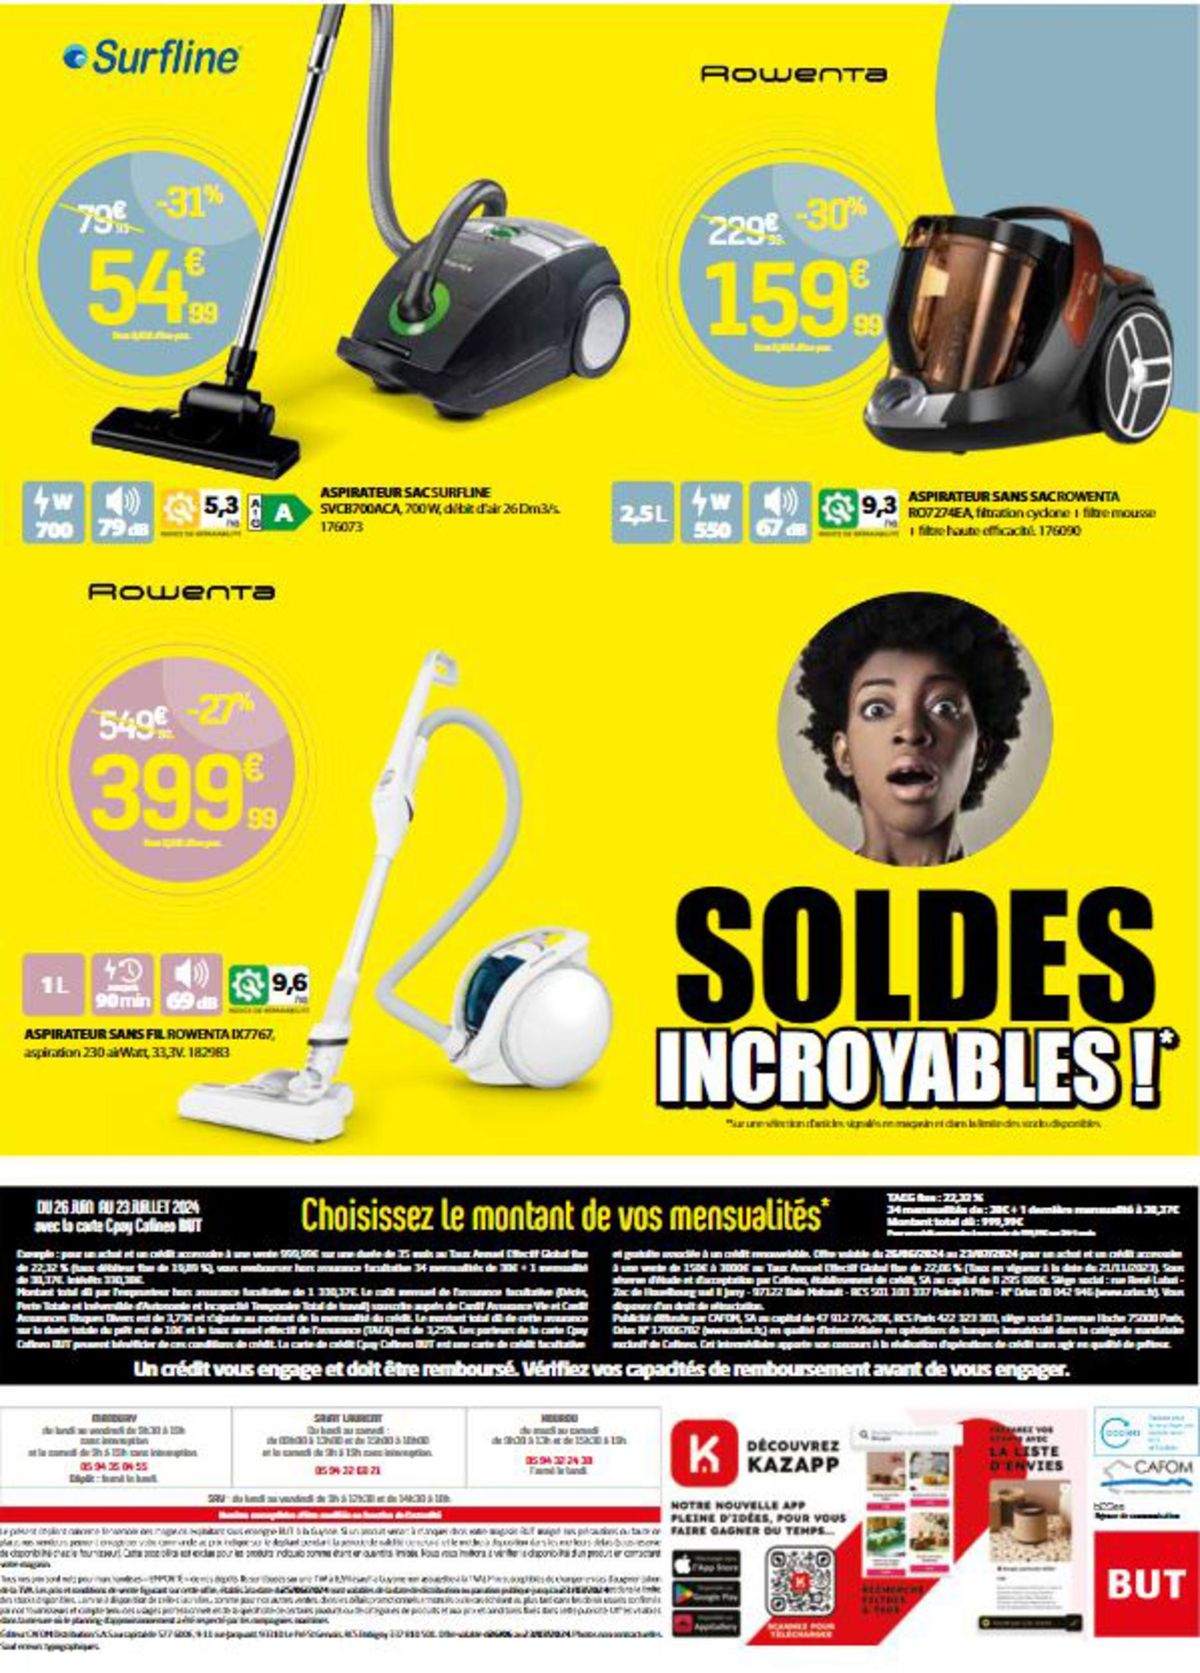 Catalogue Soldes incroyables !, page 00009